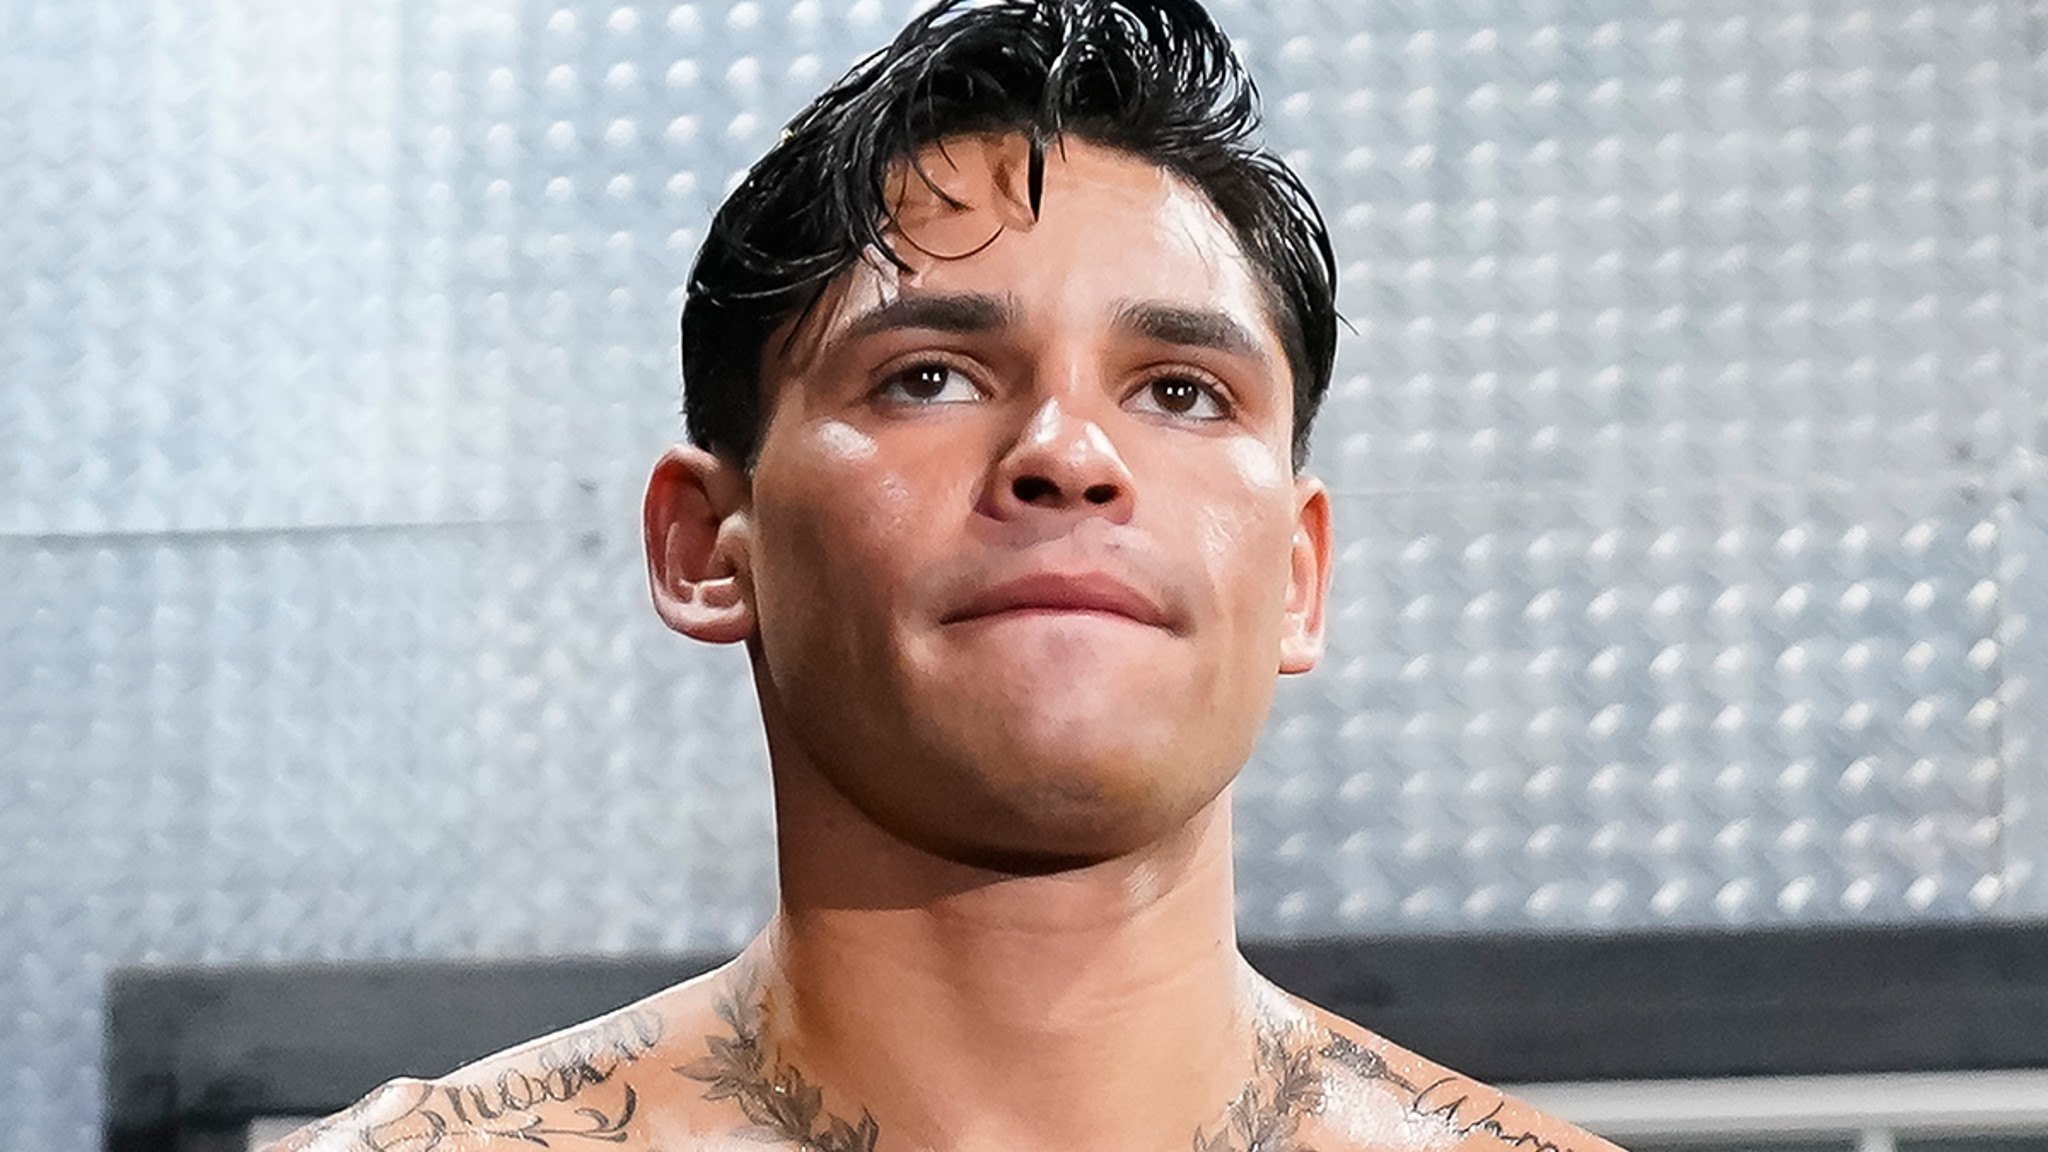 Ryan Garcia Tested Positive For PED Before Haney Fight, Boxer Denies Cheating